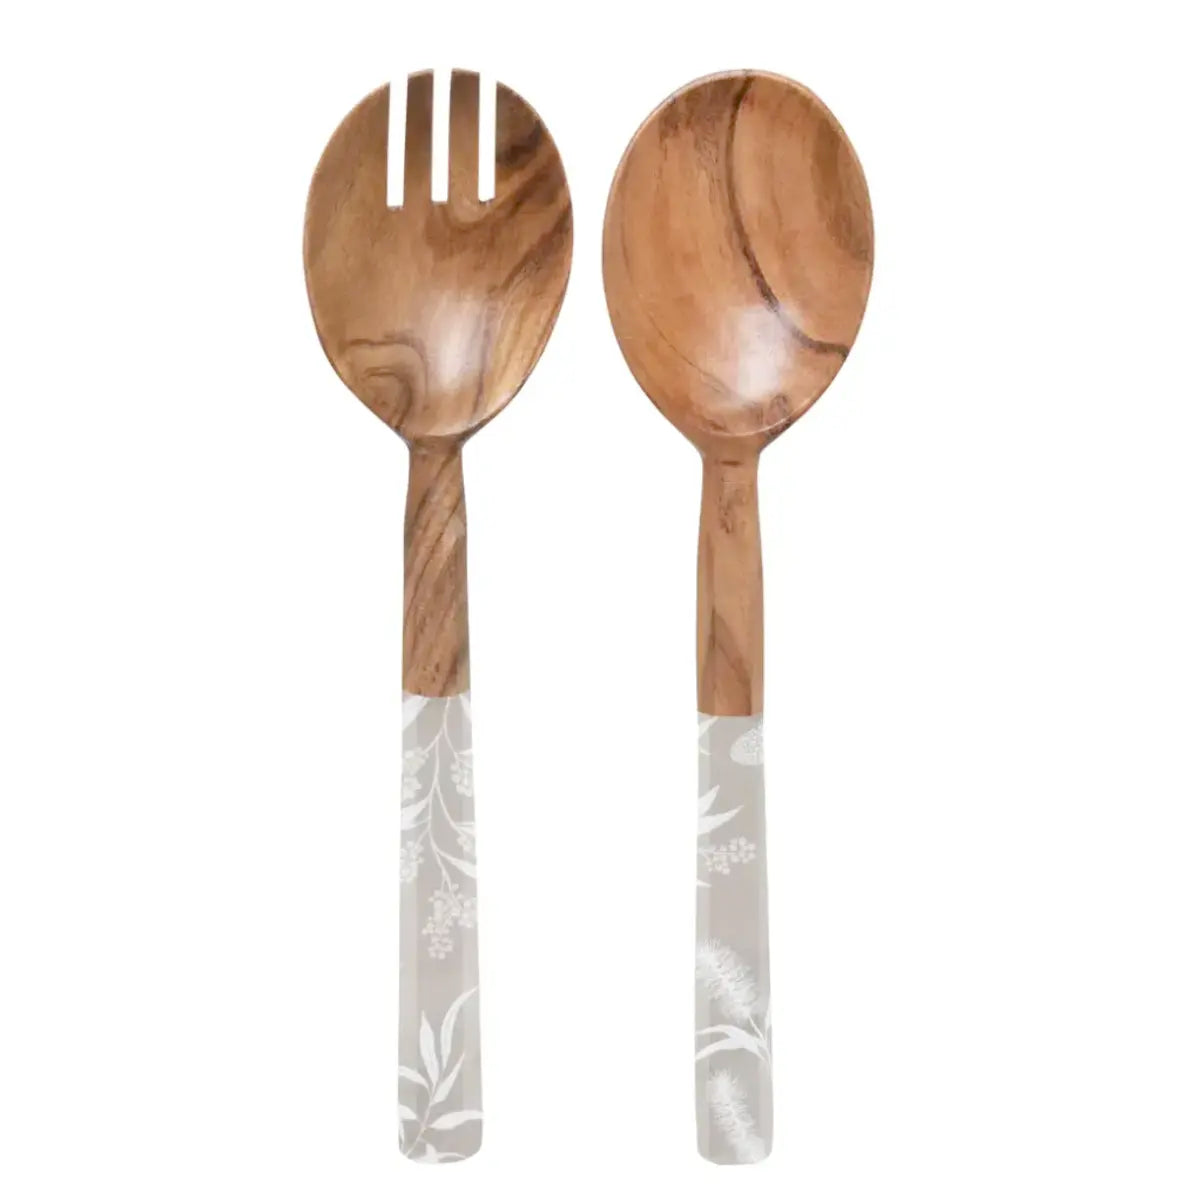 Two j.elliot Bindi Salad Servers with floral designs, crafted from sustainable mango wood.